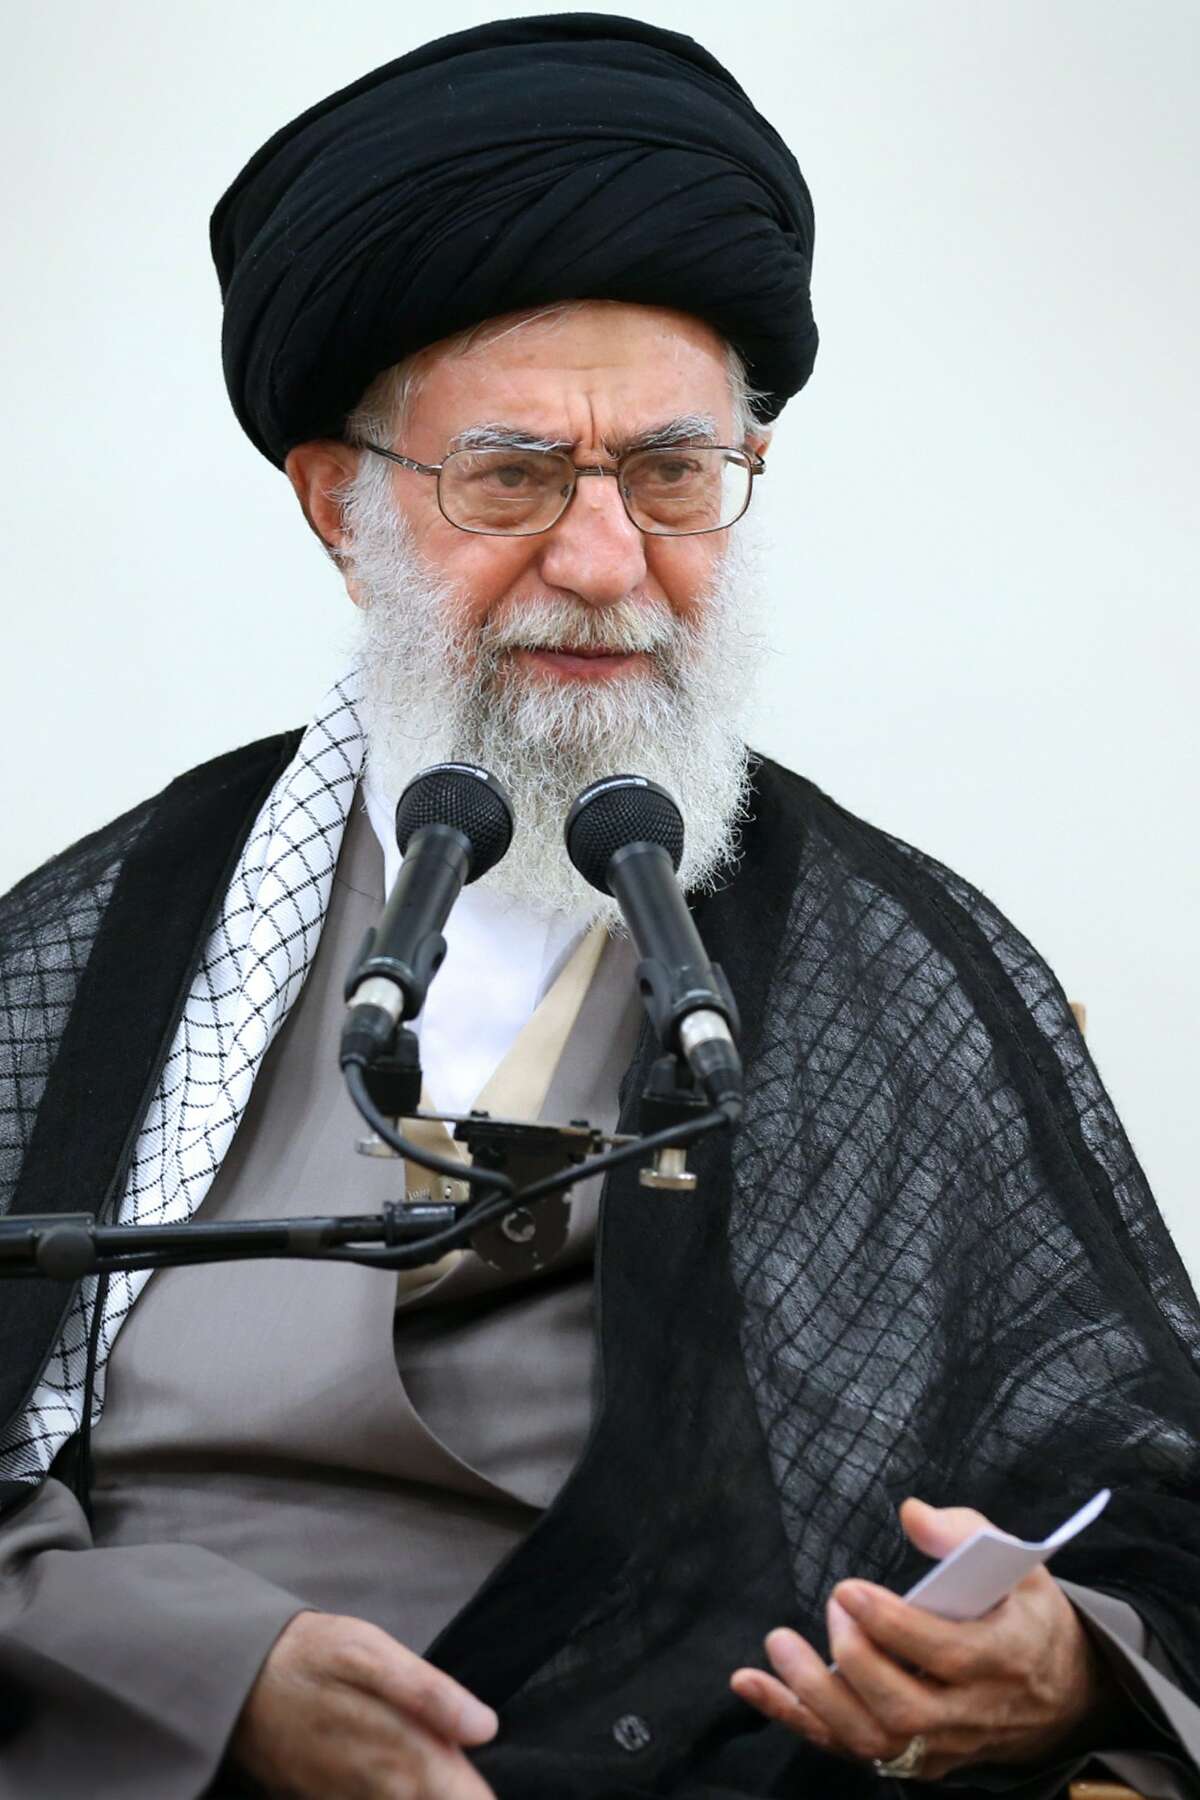 Ayatollah Ali Kha menei has ordered parliament to vote on the pact.